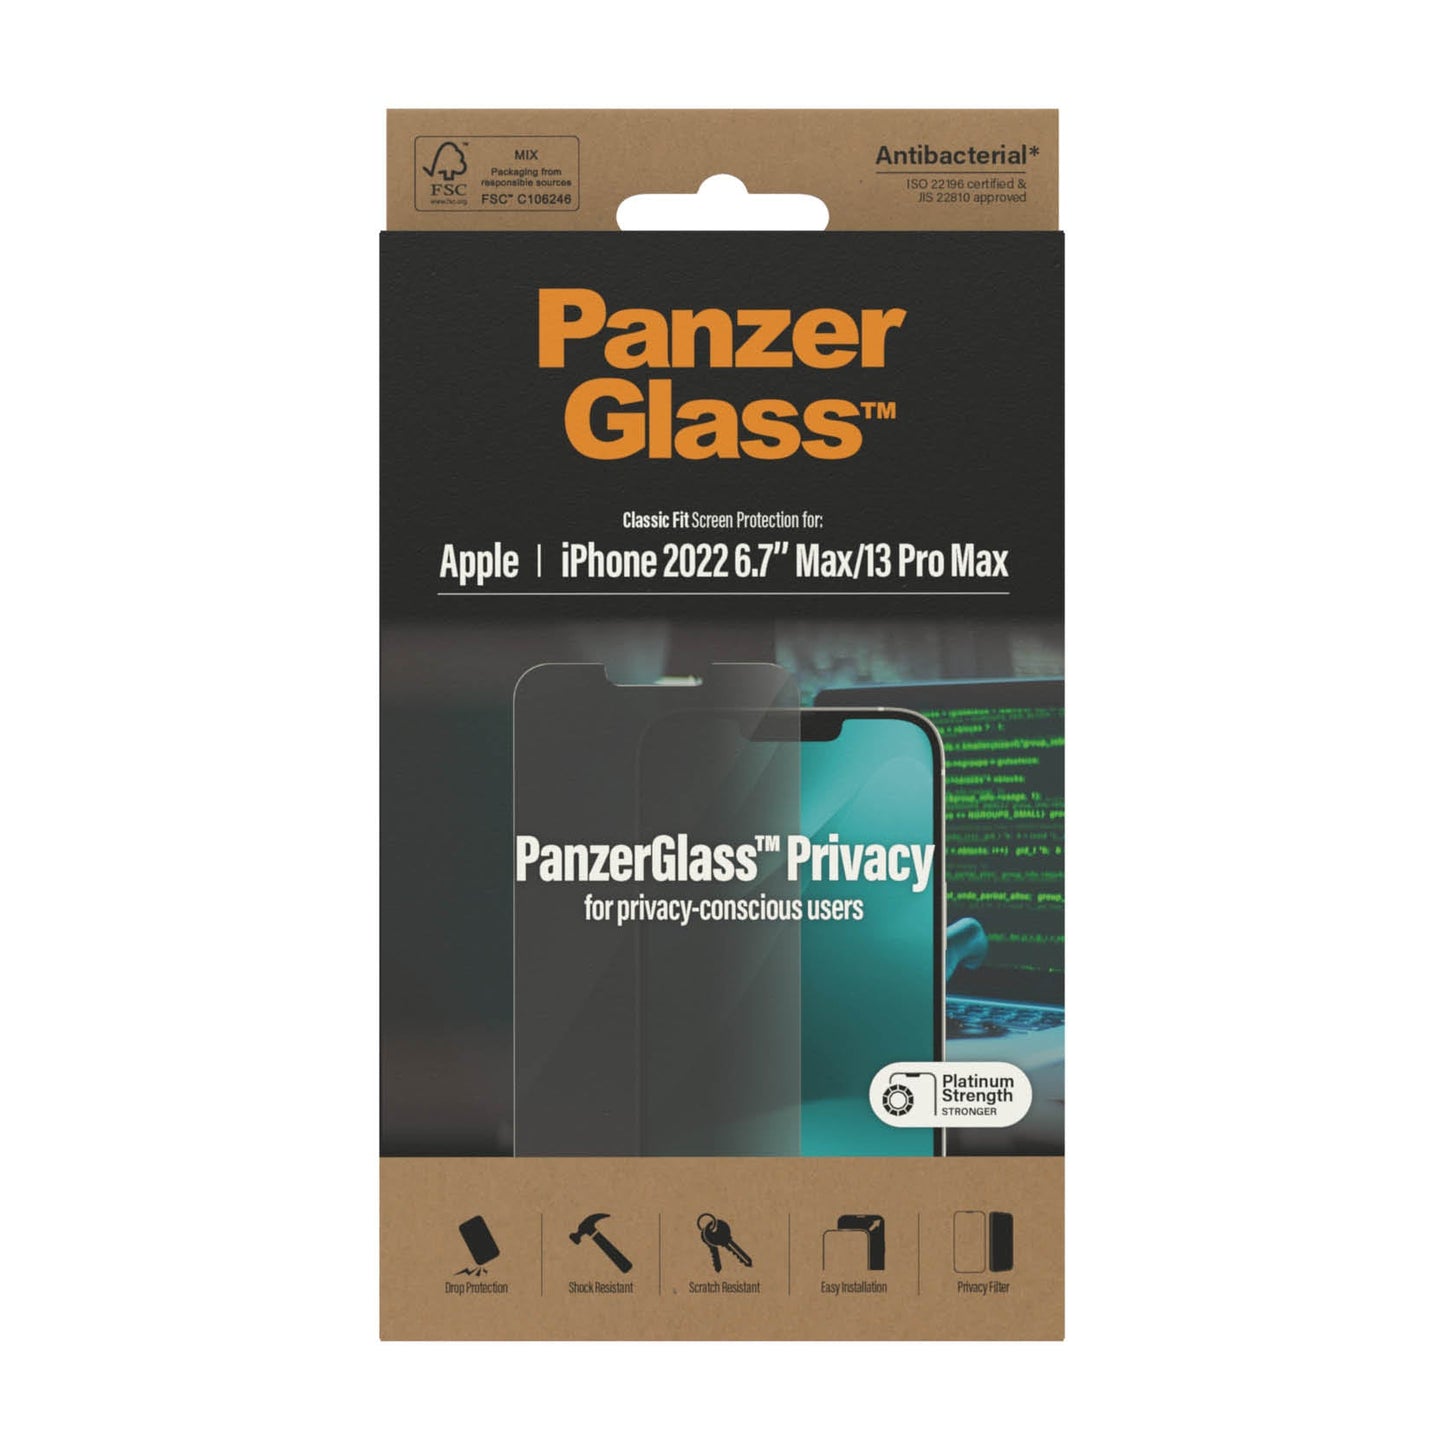 PanzerGlass™ Classic Fit Privacy Screen Protector for iPhone 14 Plus, iPhone 13 Pro Max